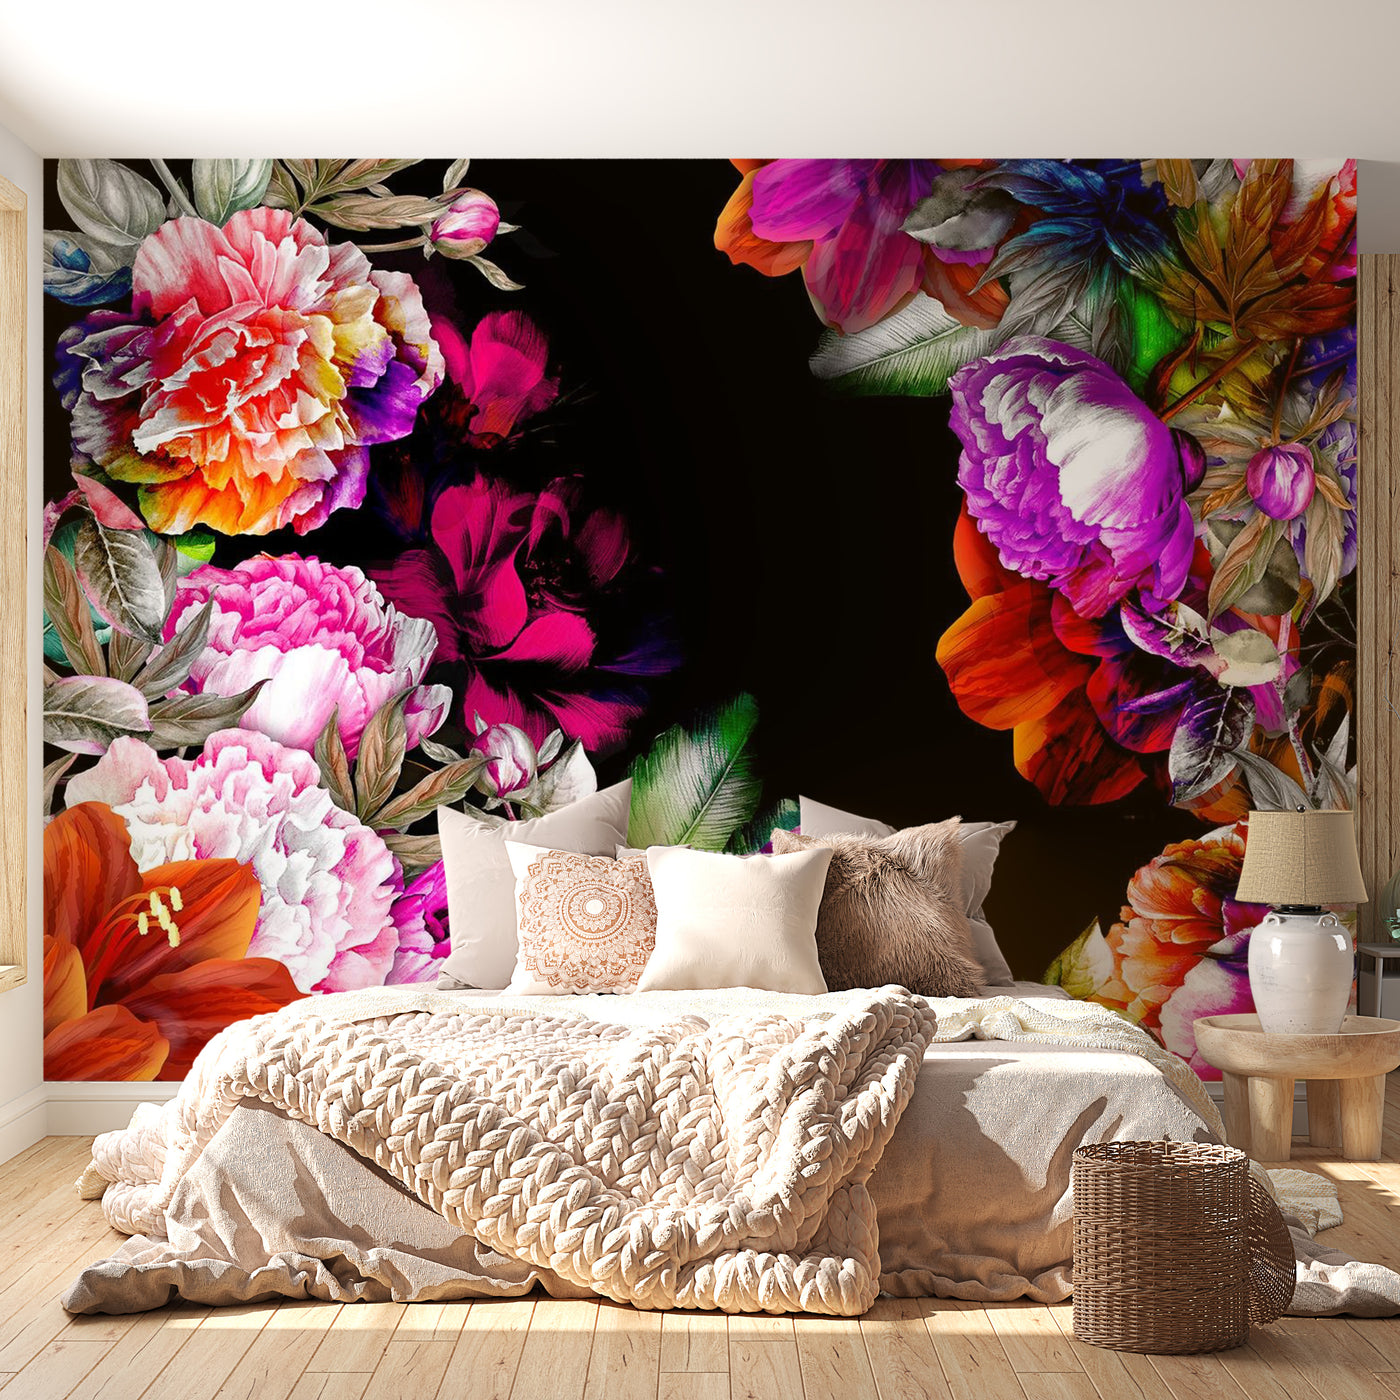 Peel & Stick Floral Wall Mural - Warm Tones Of Summer - Removable Wall Decals